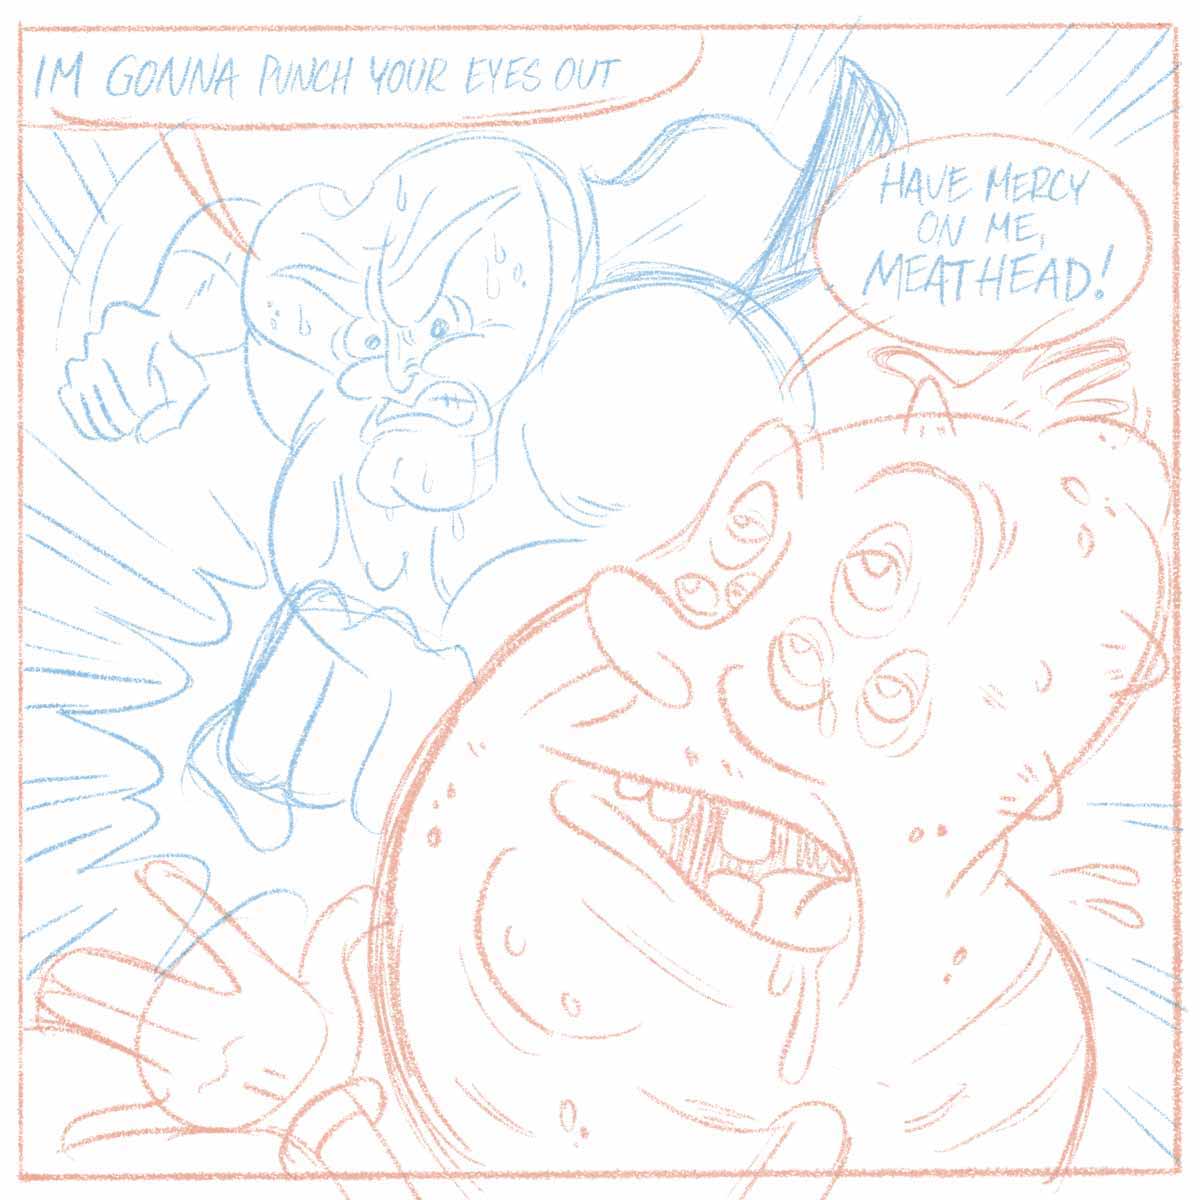 Sketched comic panel with blue and red pencil